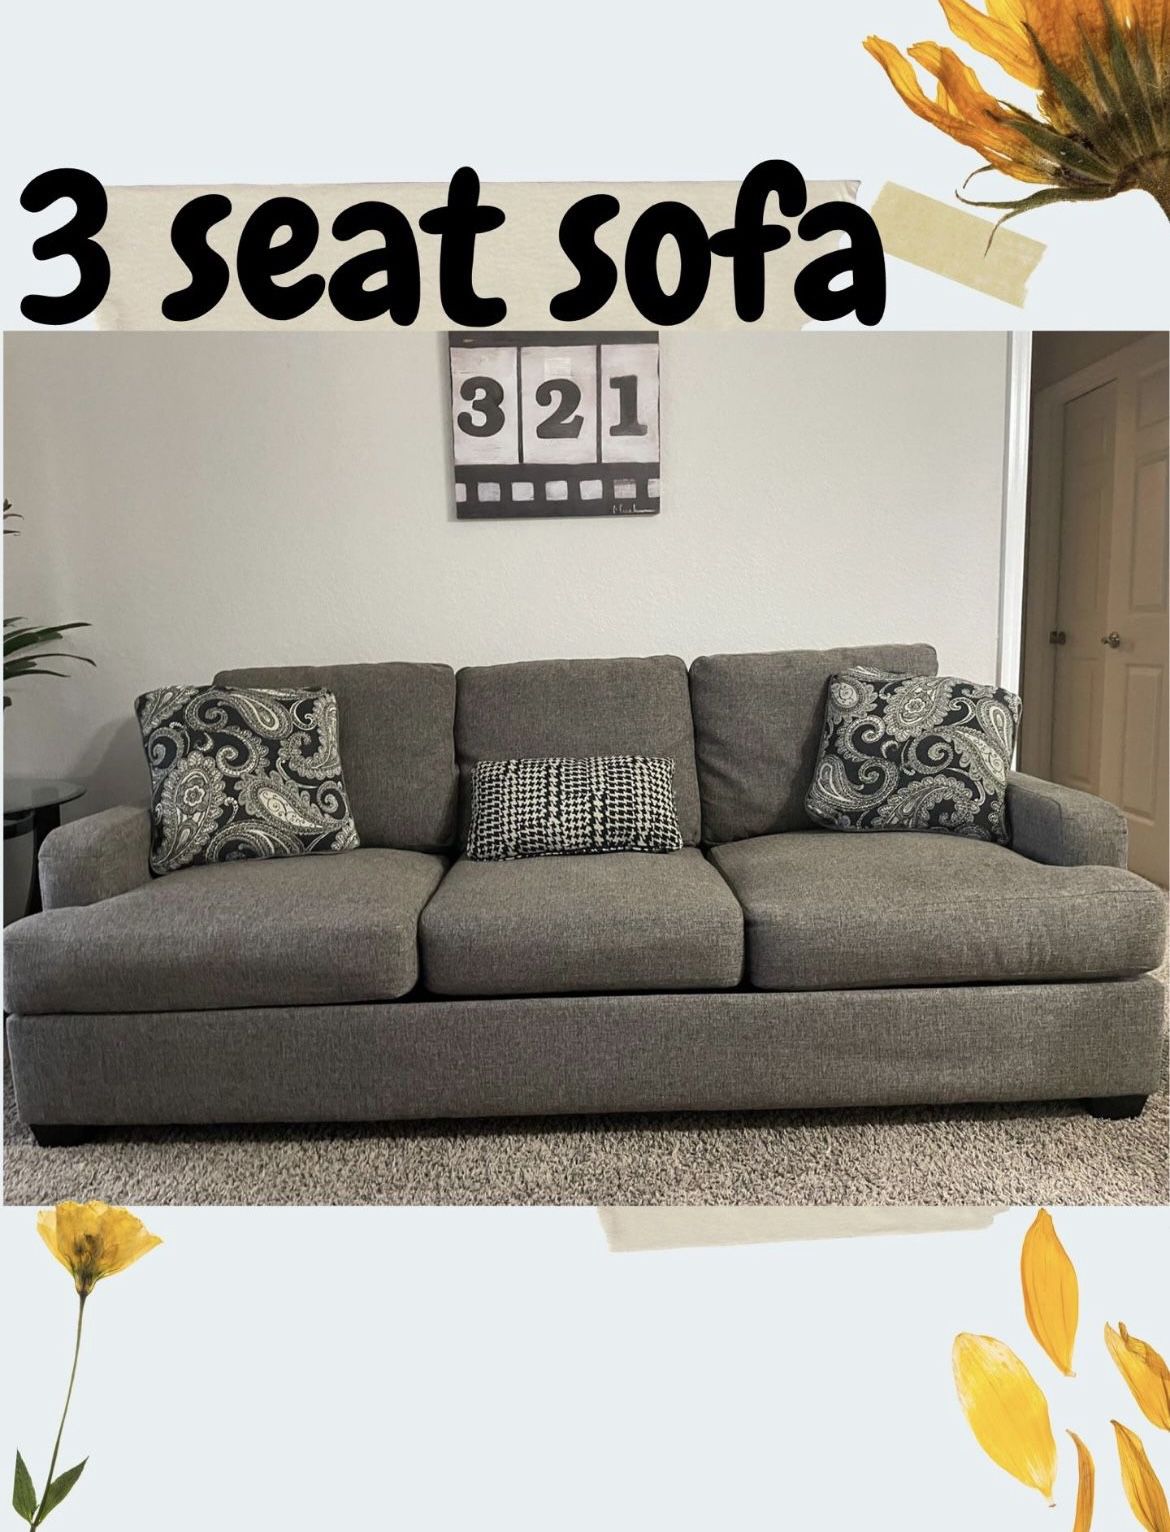 Sofa/Couch For Sale